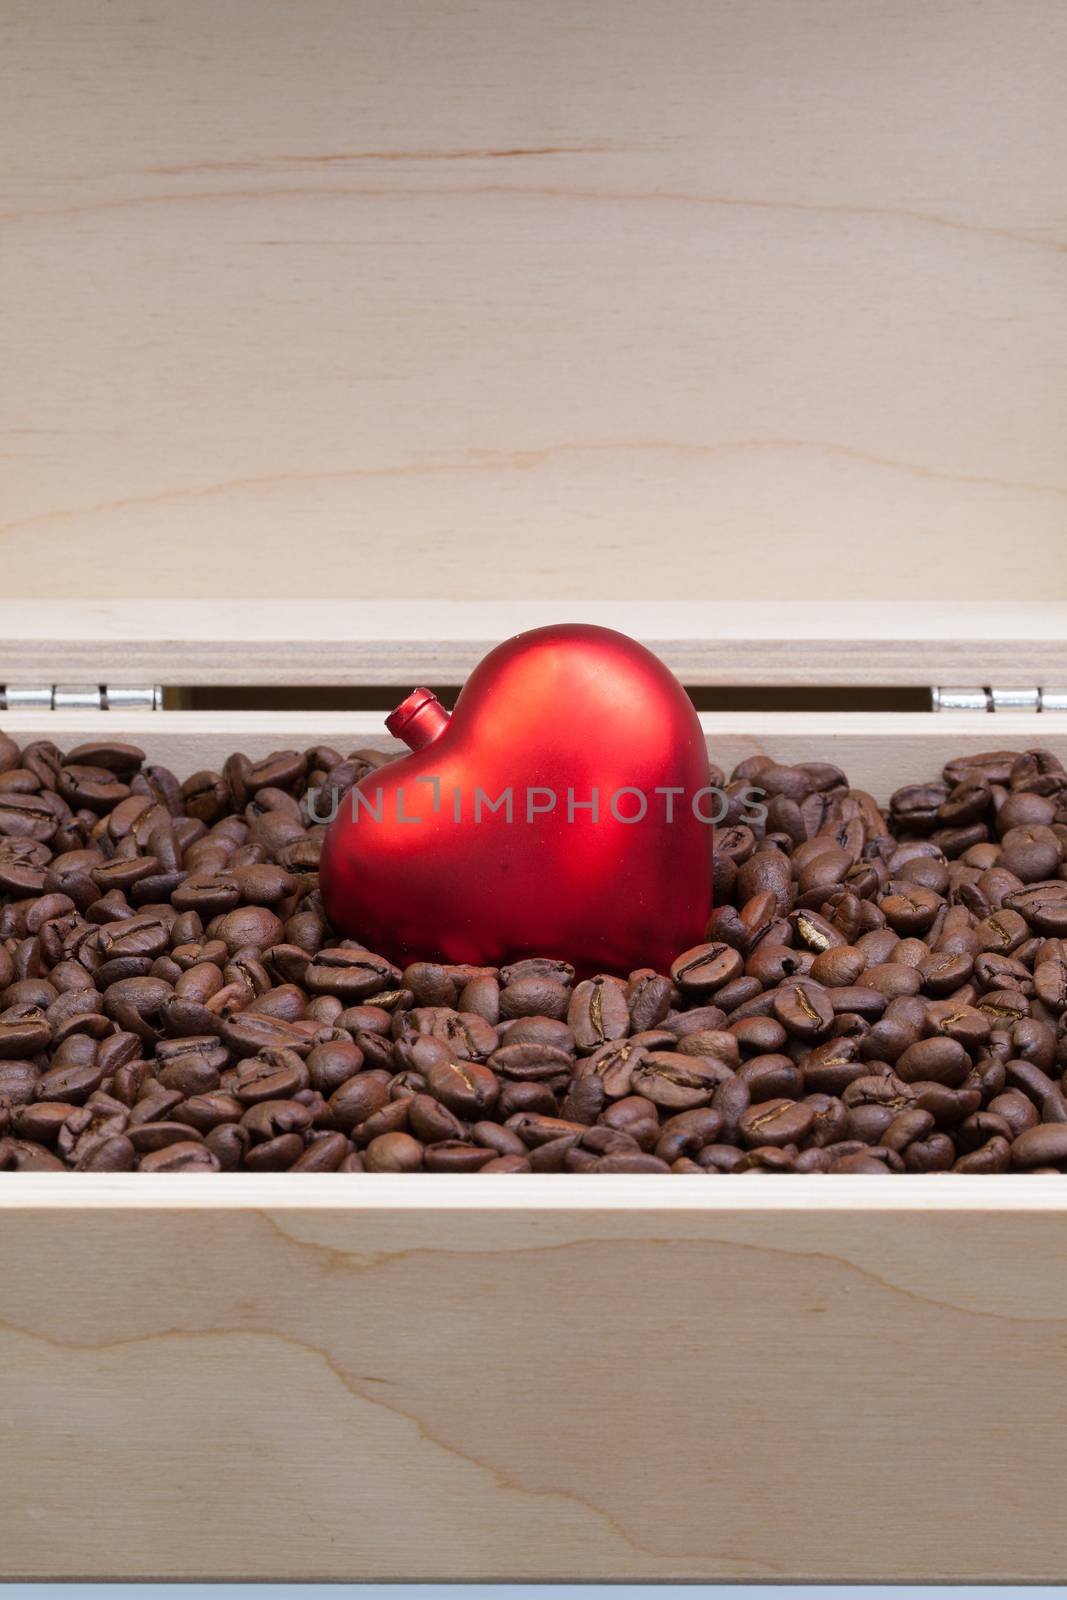 Coffee beans and red heart in an open wooden box